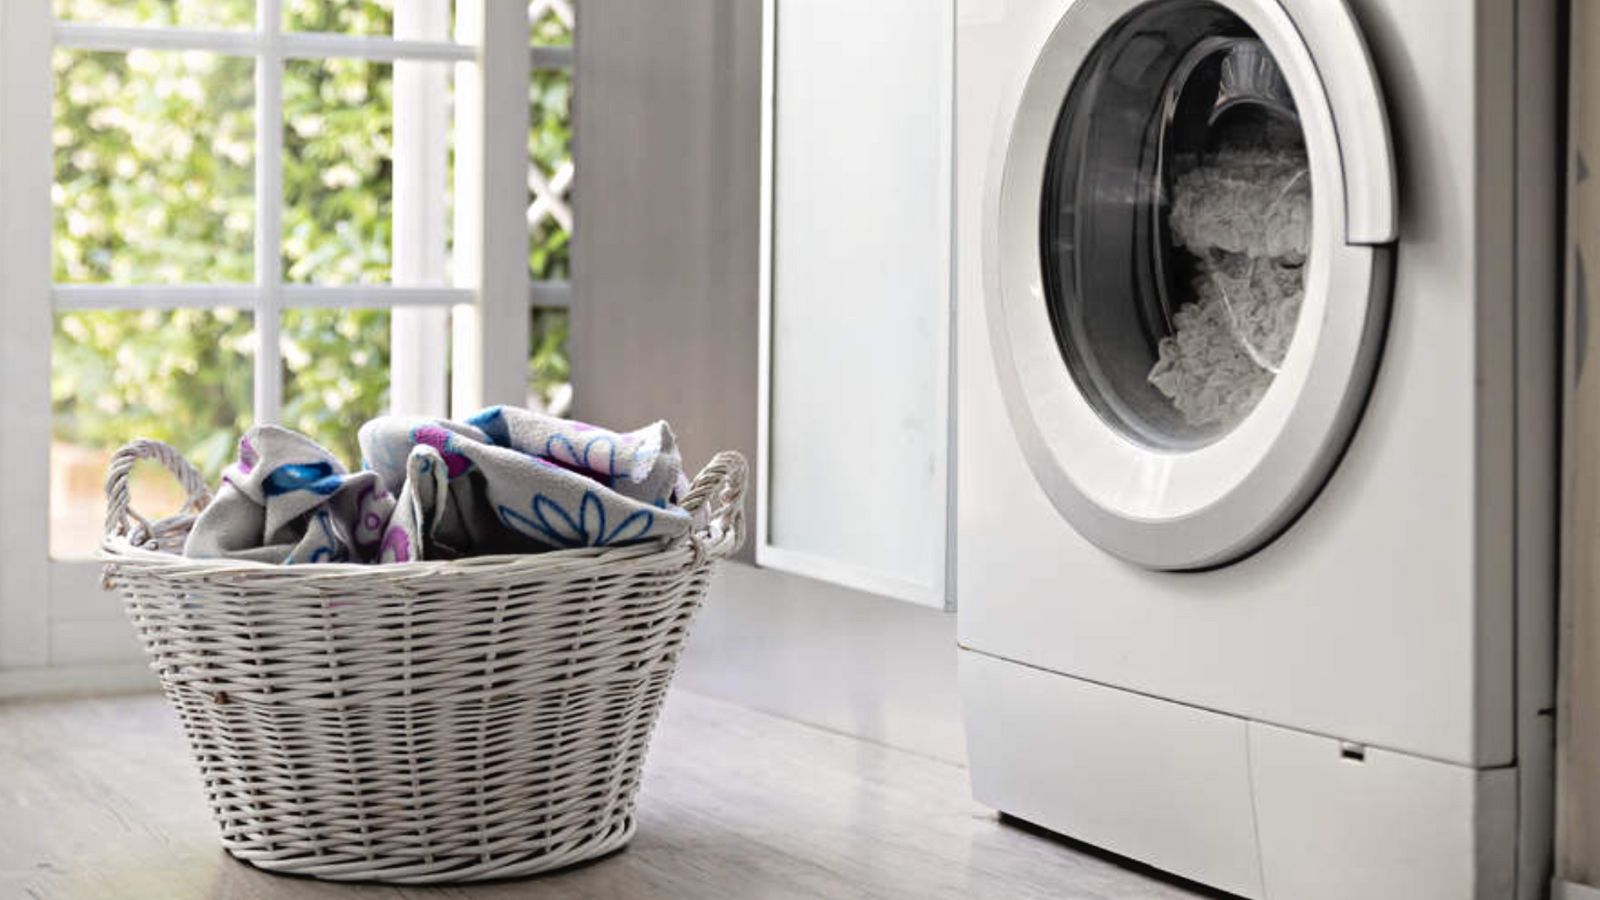 Washing underwear at high or low temperature and keeping it beautiful 